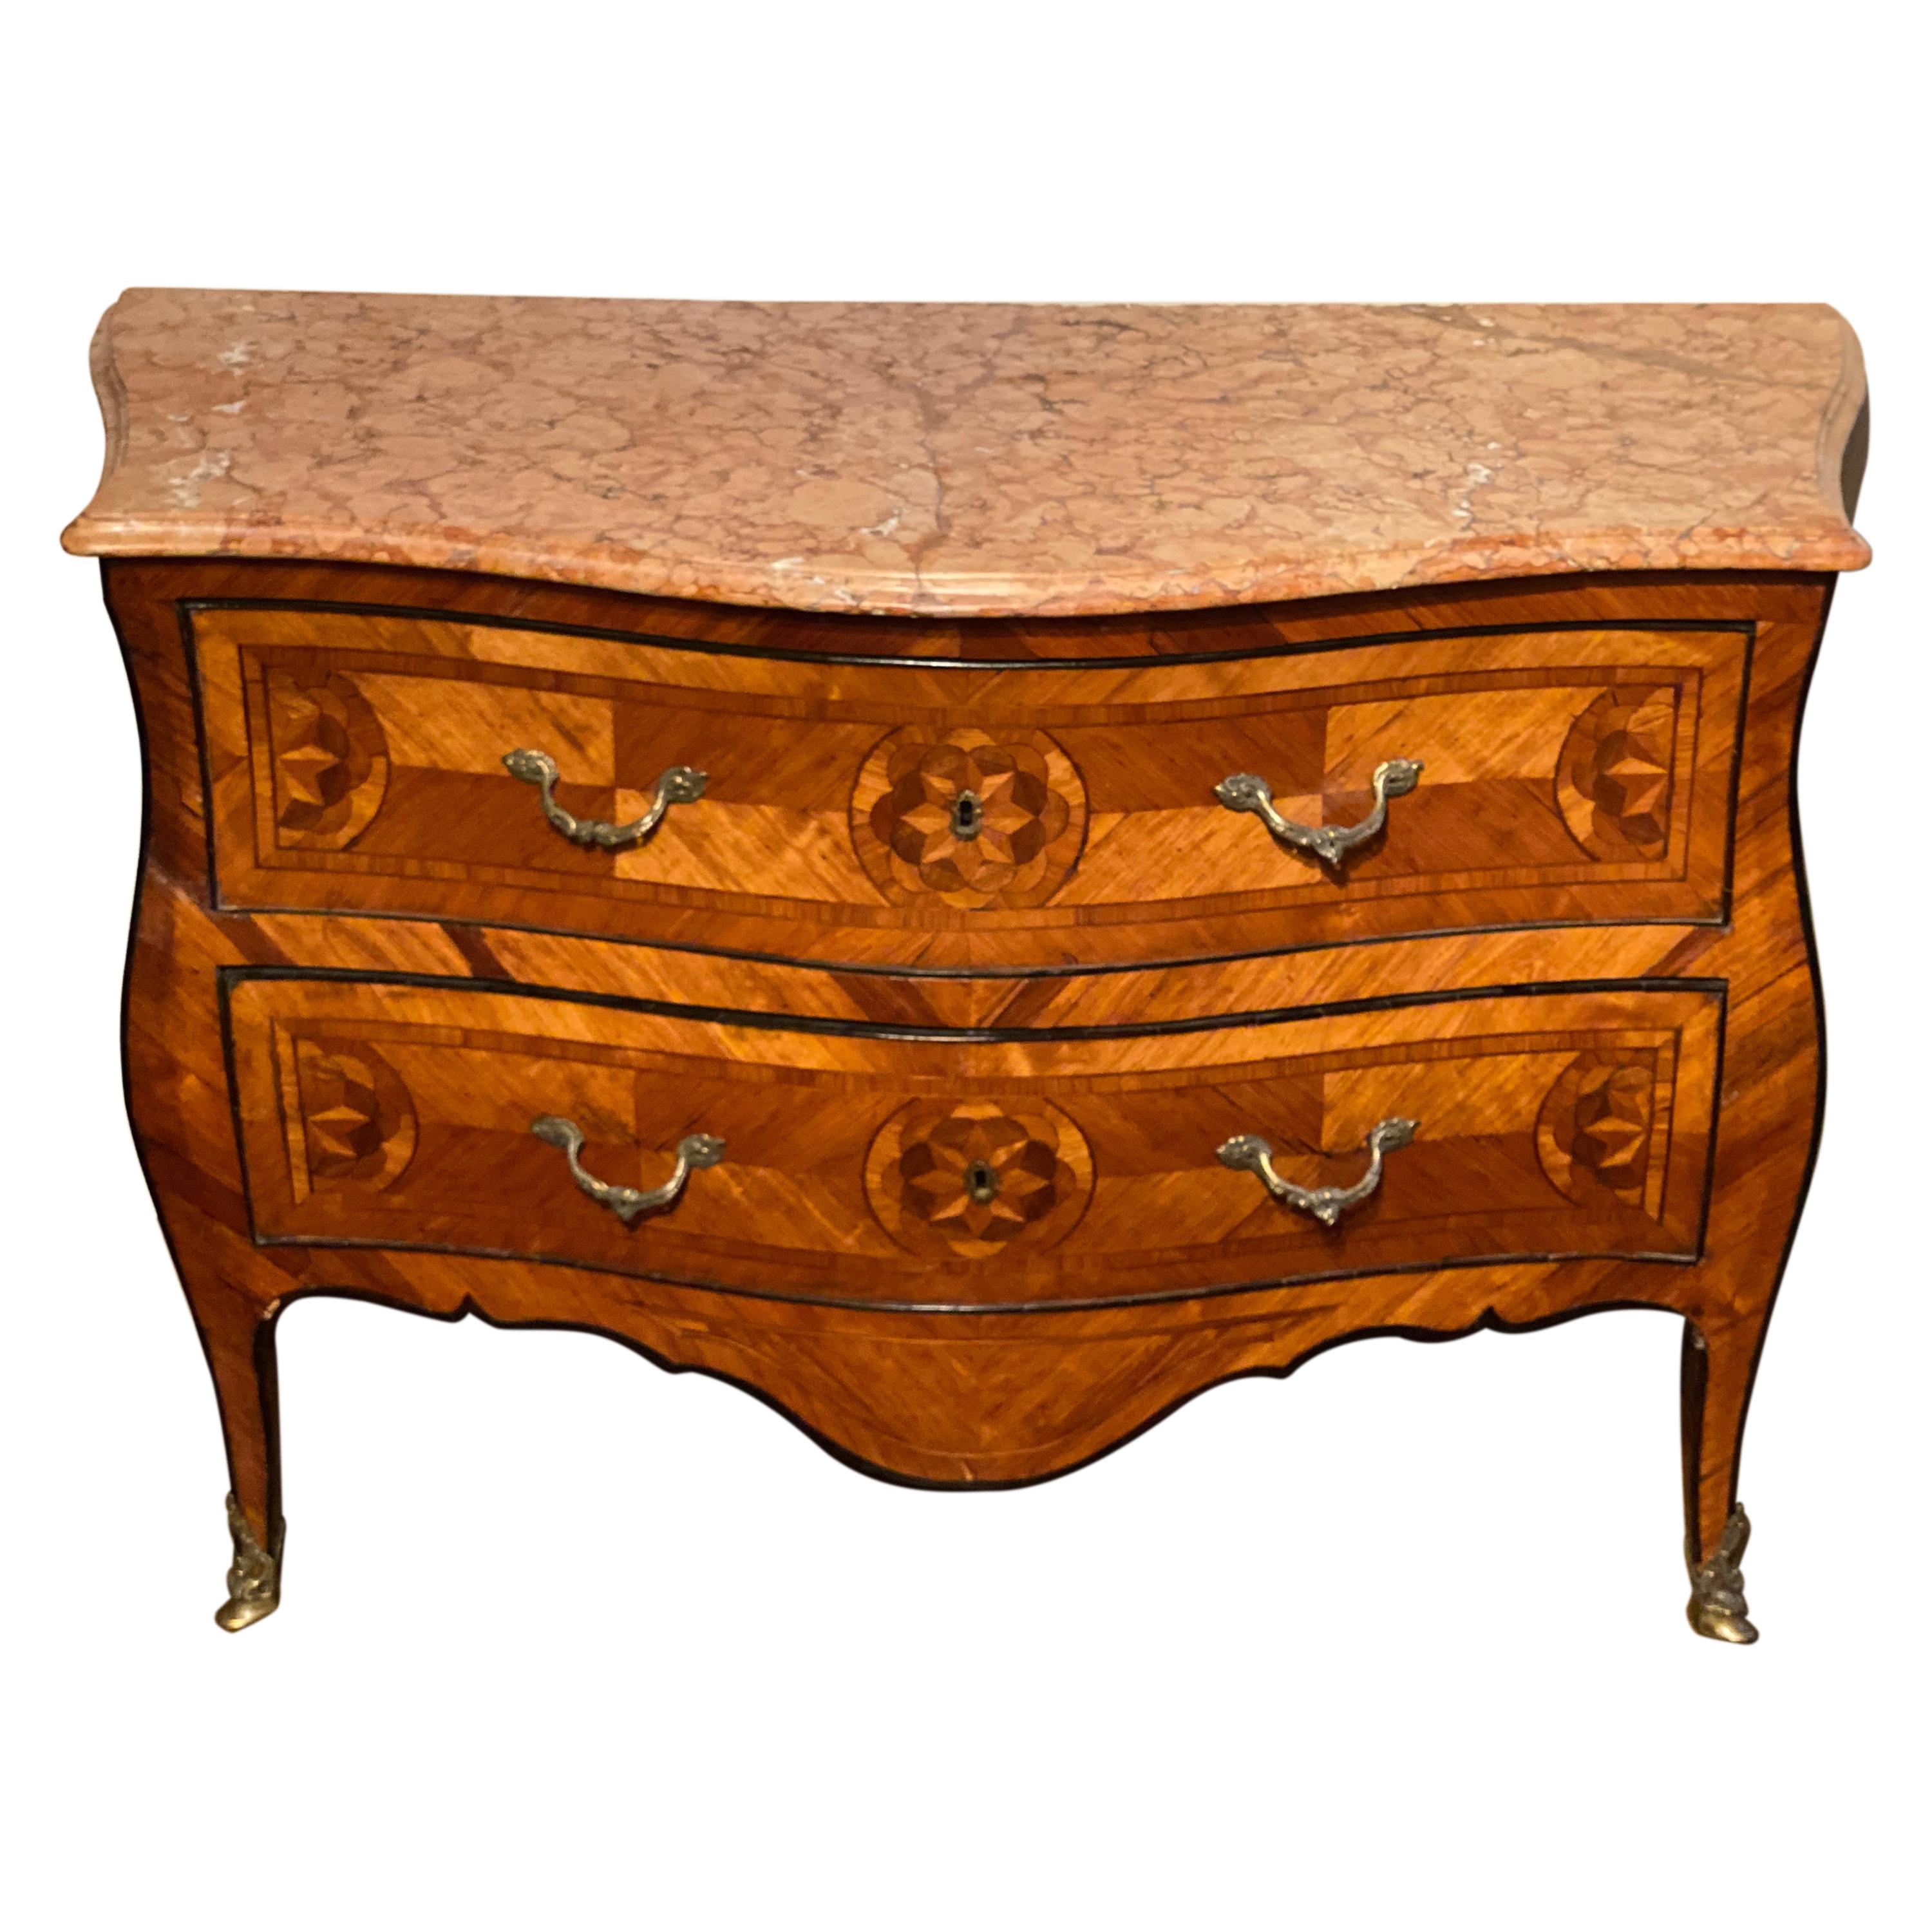 Early 18th Century Bronze Mounted Inlaid Italian Marble Top Commode